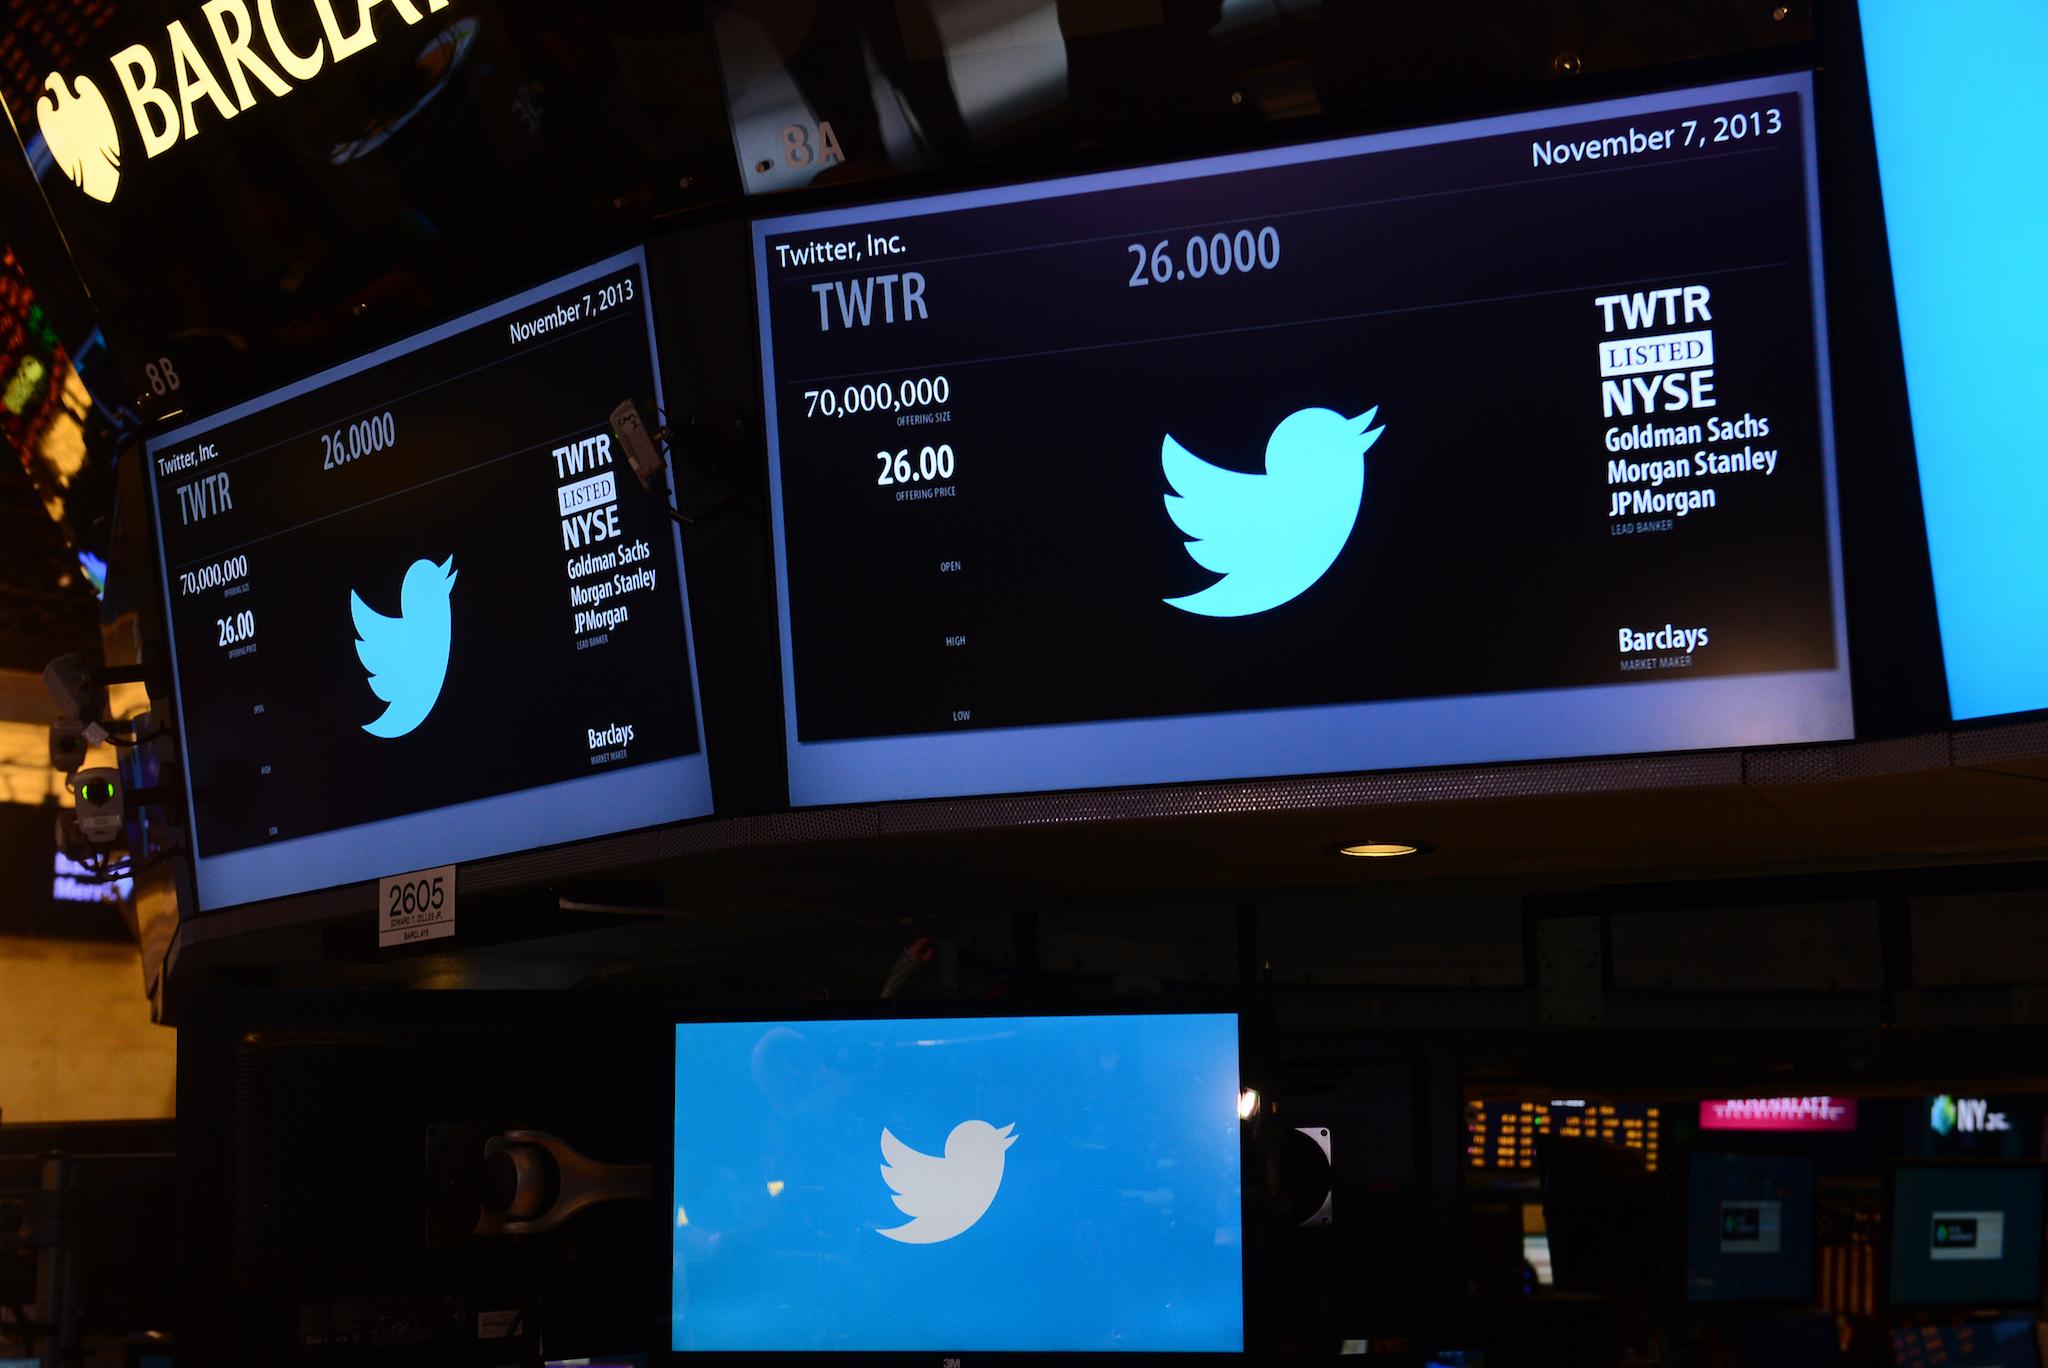 The logo of Twitter and the symbol on which Twitter's stock will be traded (TWTR) is viewed on the floor of the New York Stock Exchange (NYSE) on November 7, 2013 in New York